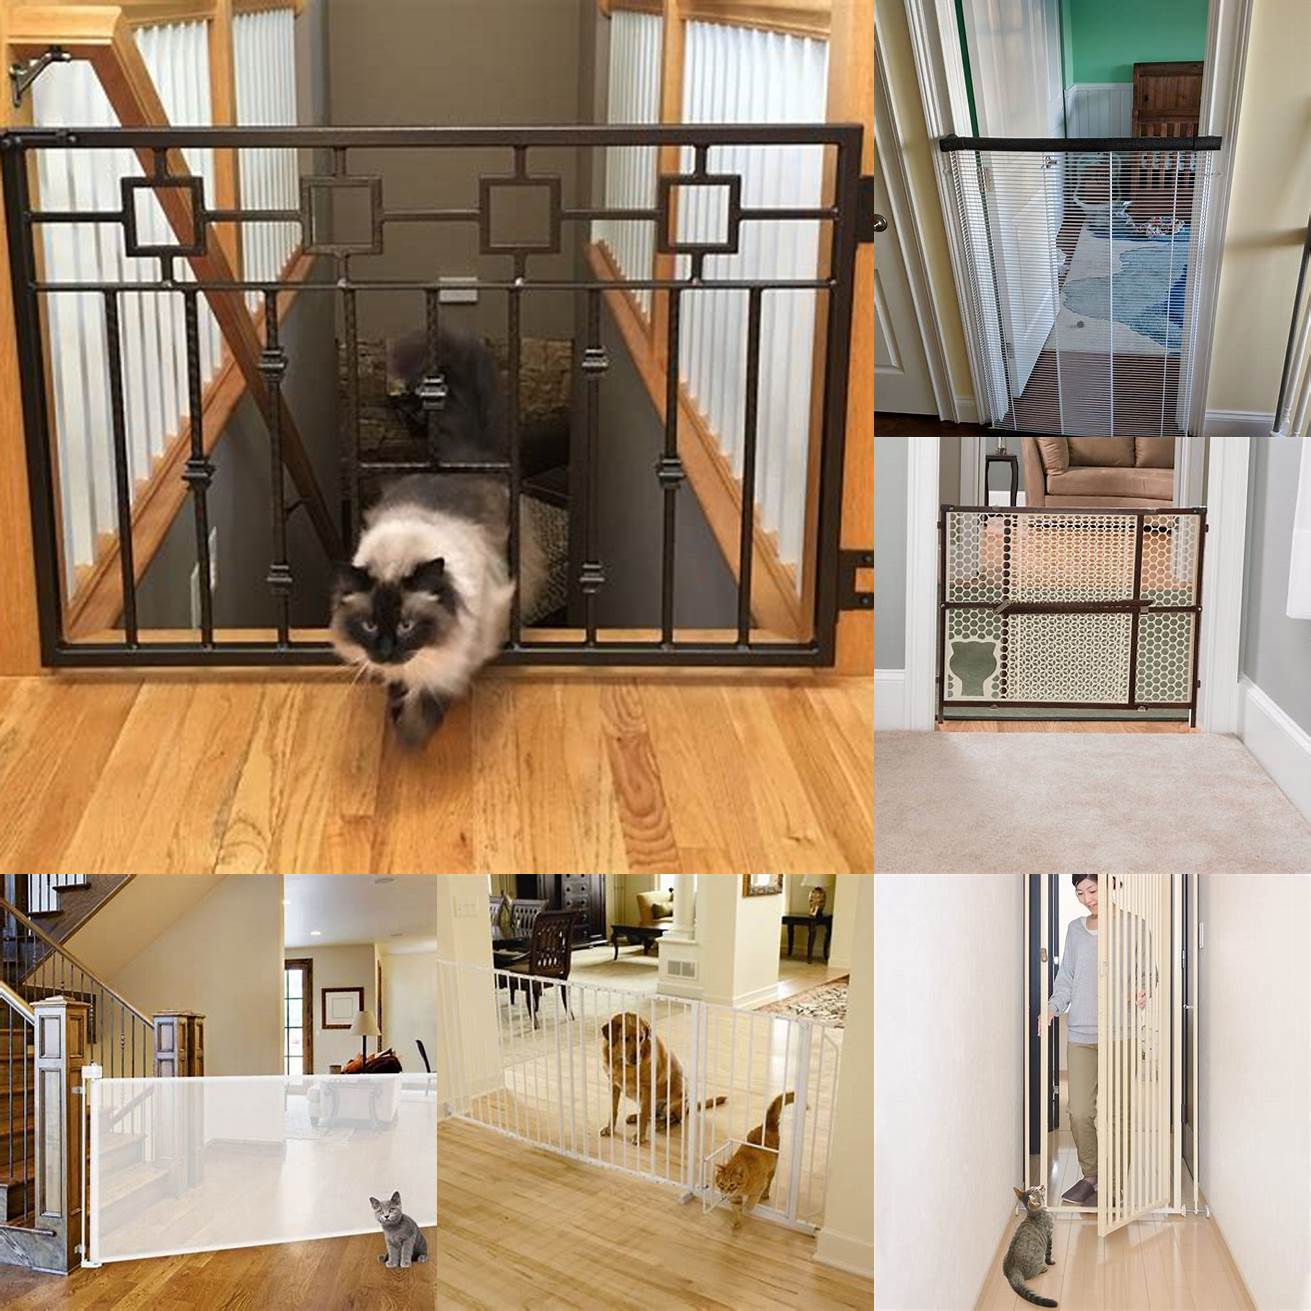 Style Choose a cat gate that matches the decor of your home You can find cat gates in a variety of styles and designs so youre sure to find one that fits your aesthetic